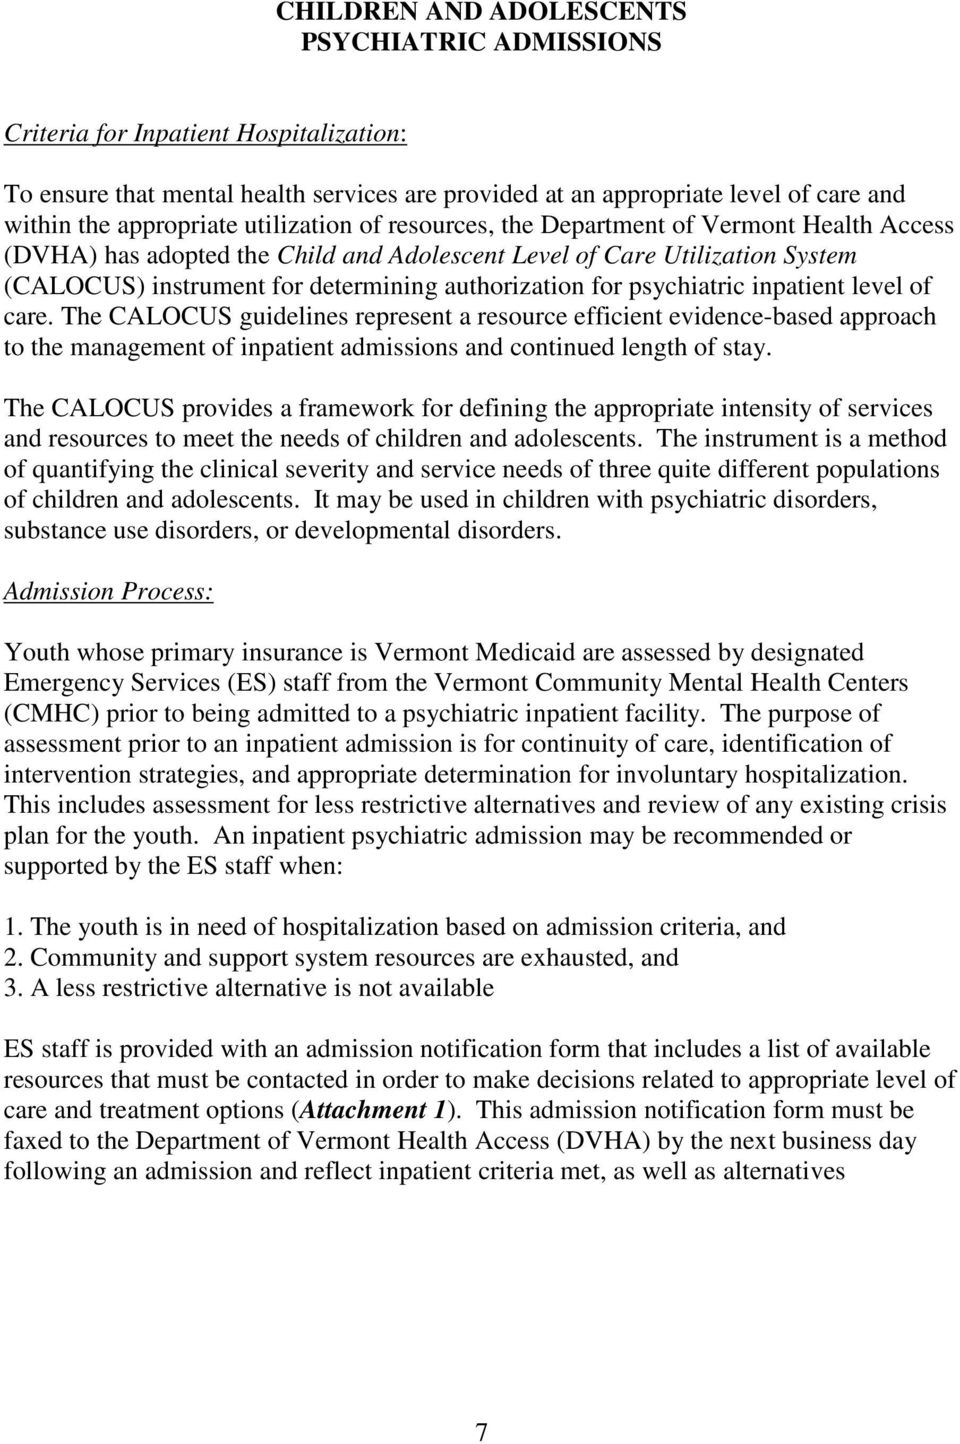 psychiatric inpatient level of care. The CALOCUS guidelines represent a resource efficient evidence-based approach to the management of inpatient admissions and continued length of stay.